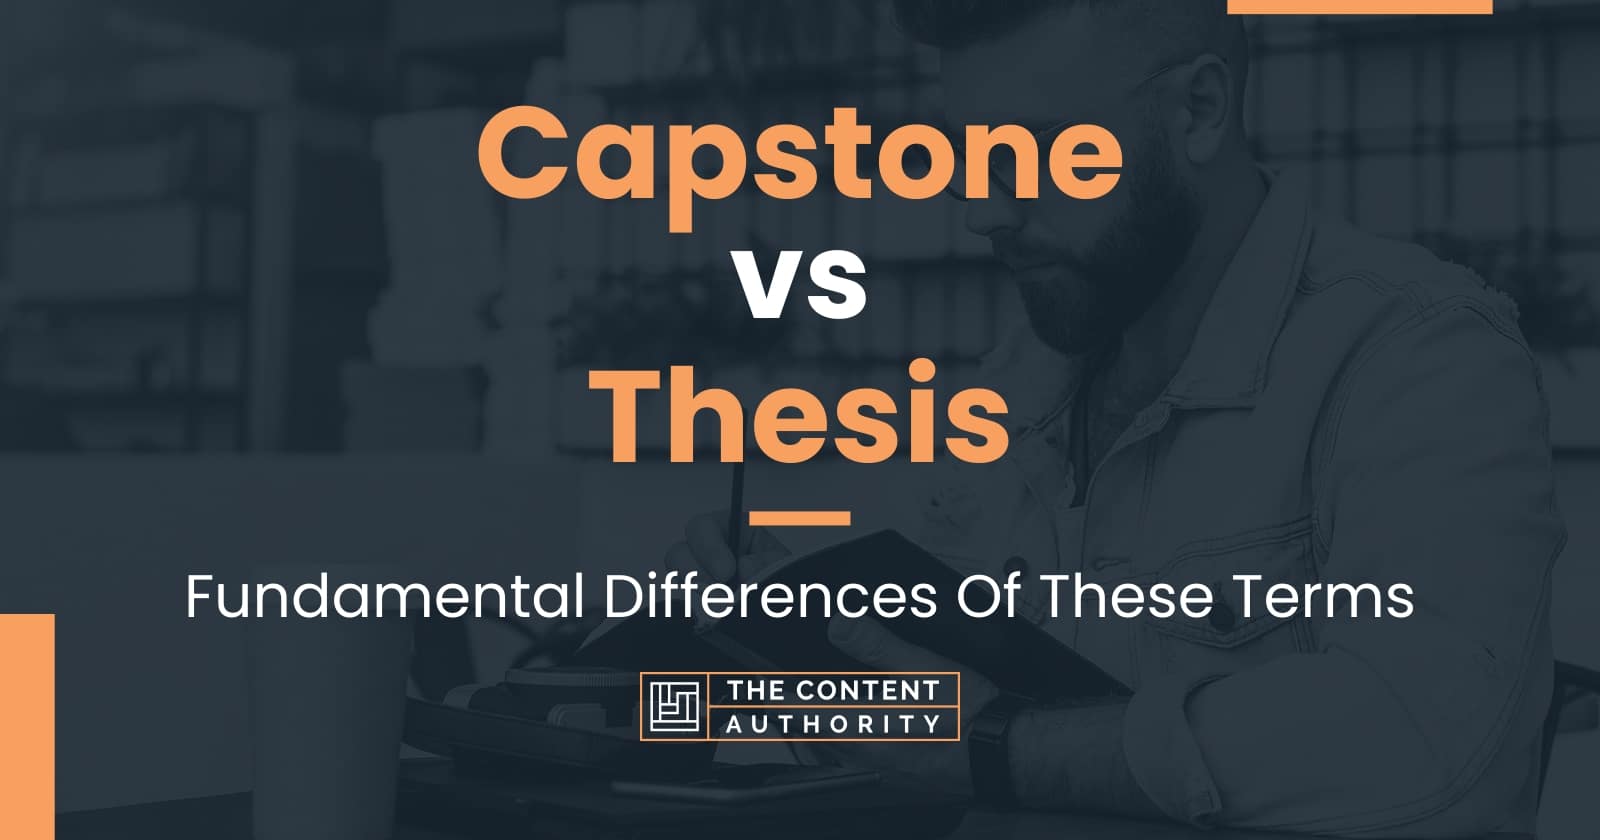 capstone thesis meaning